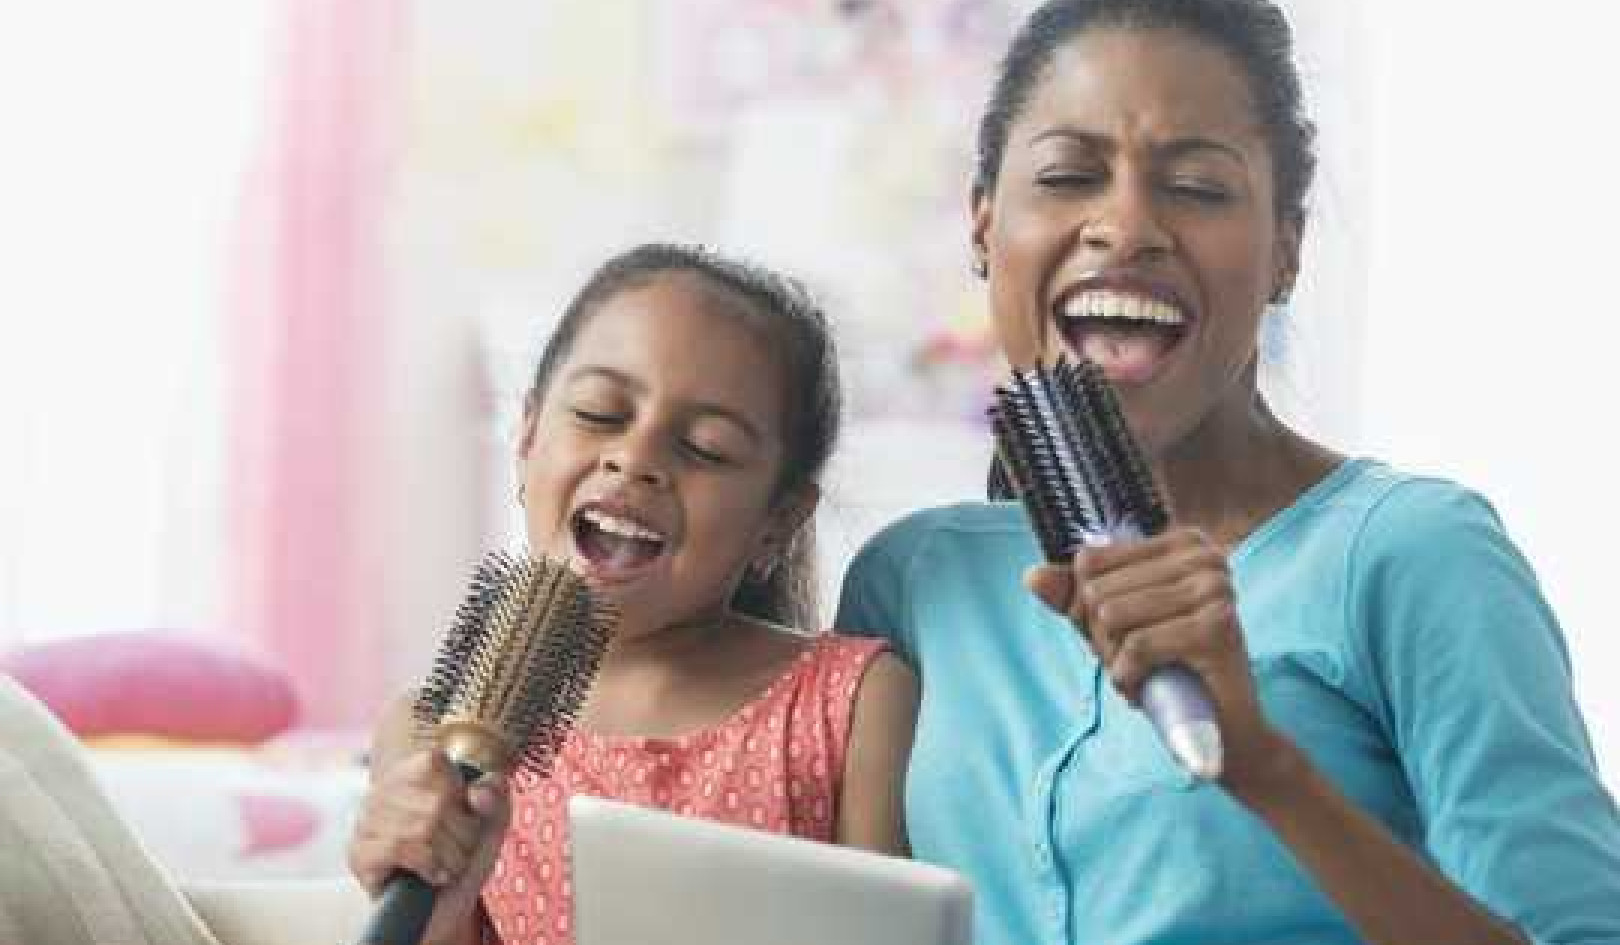 How Using Music To Parent Can Liven Up Everyday Tasks, Build Family Bonds